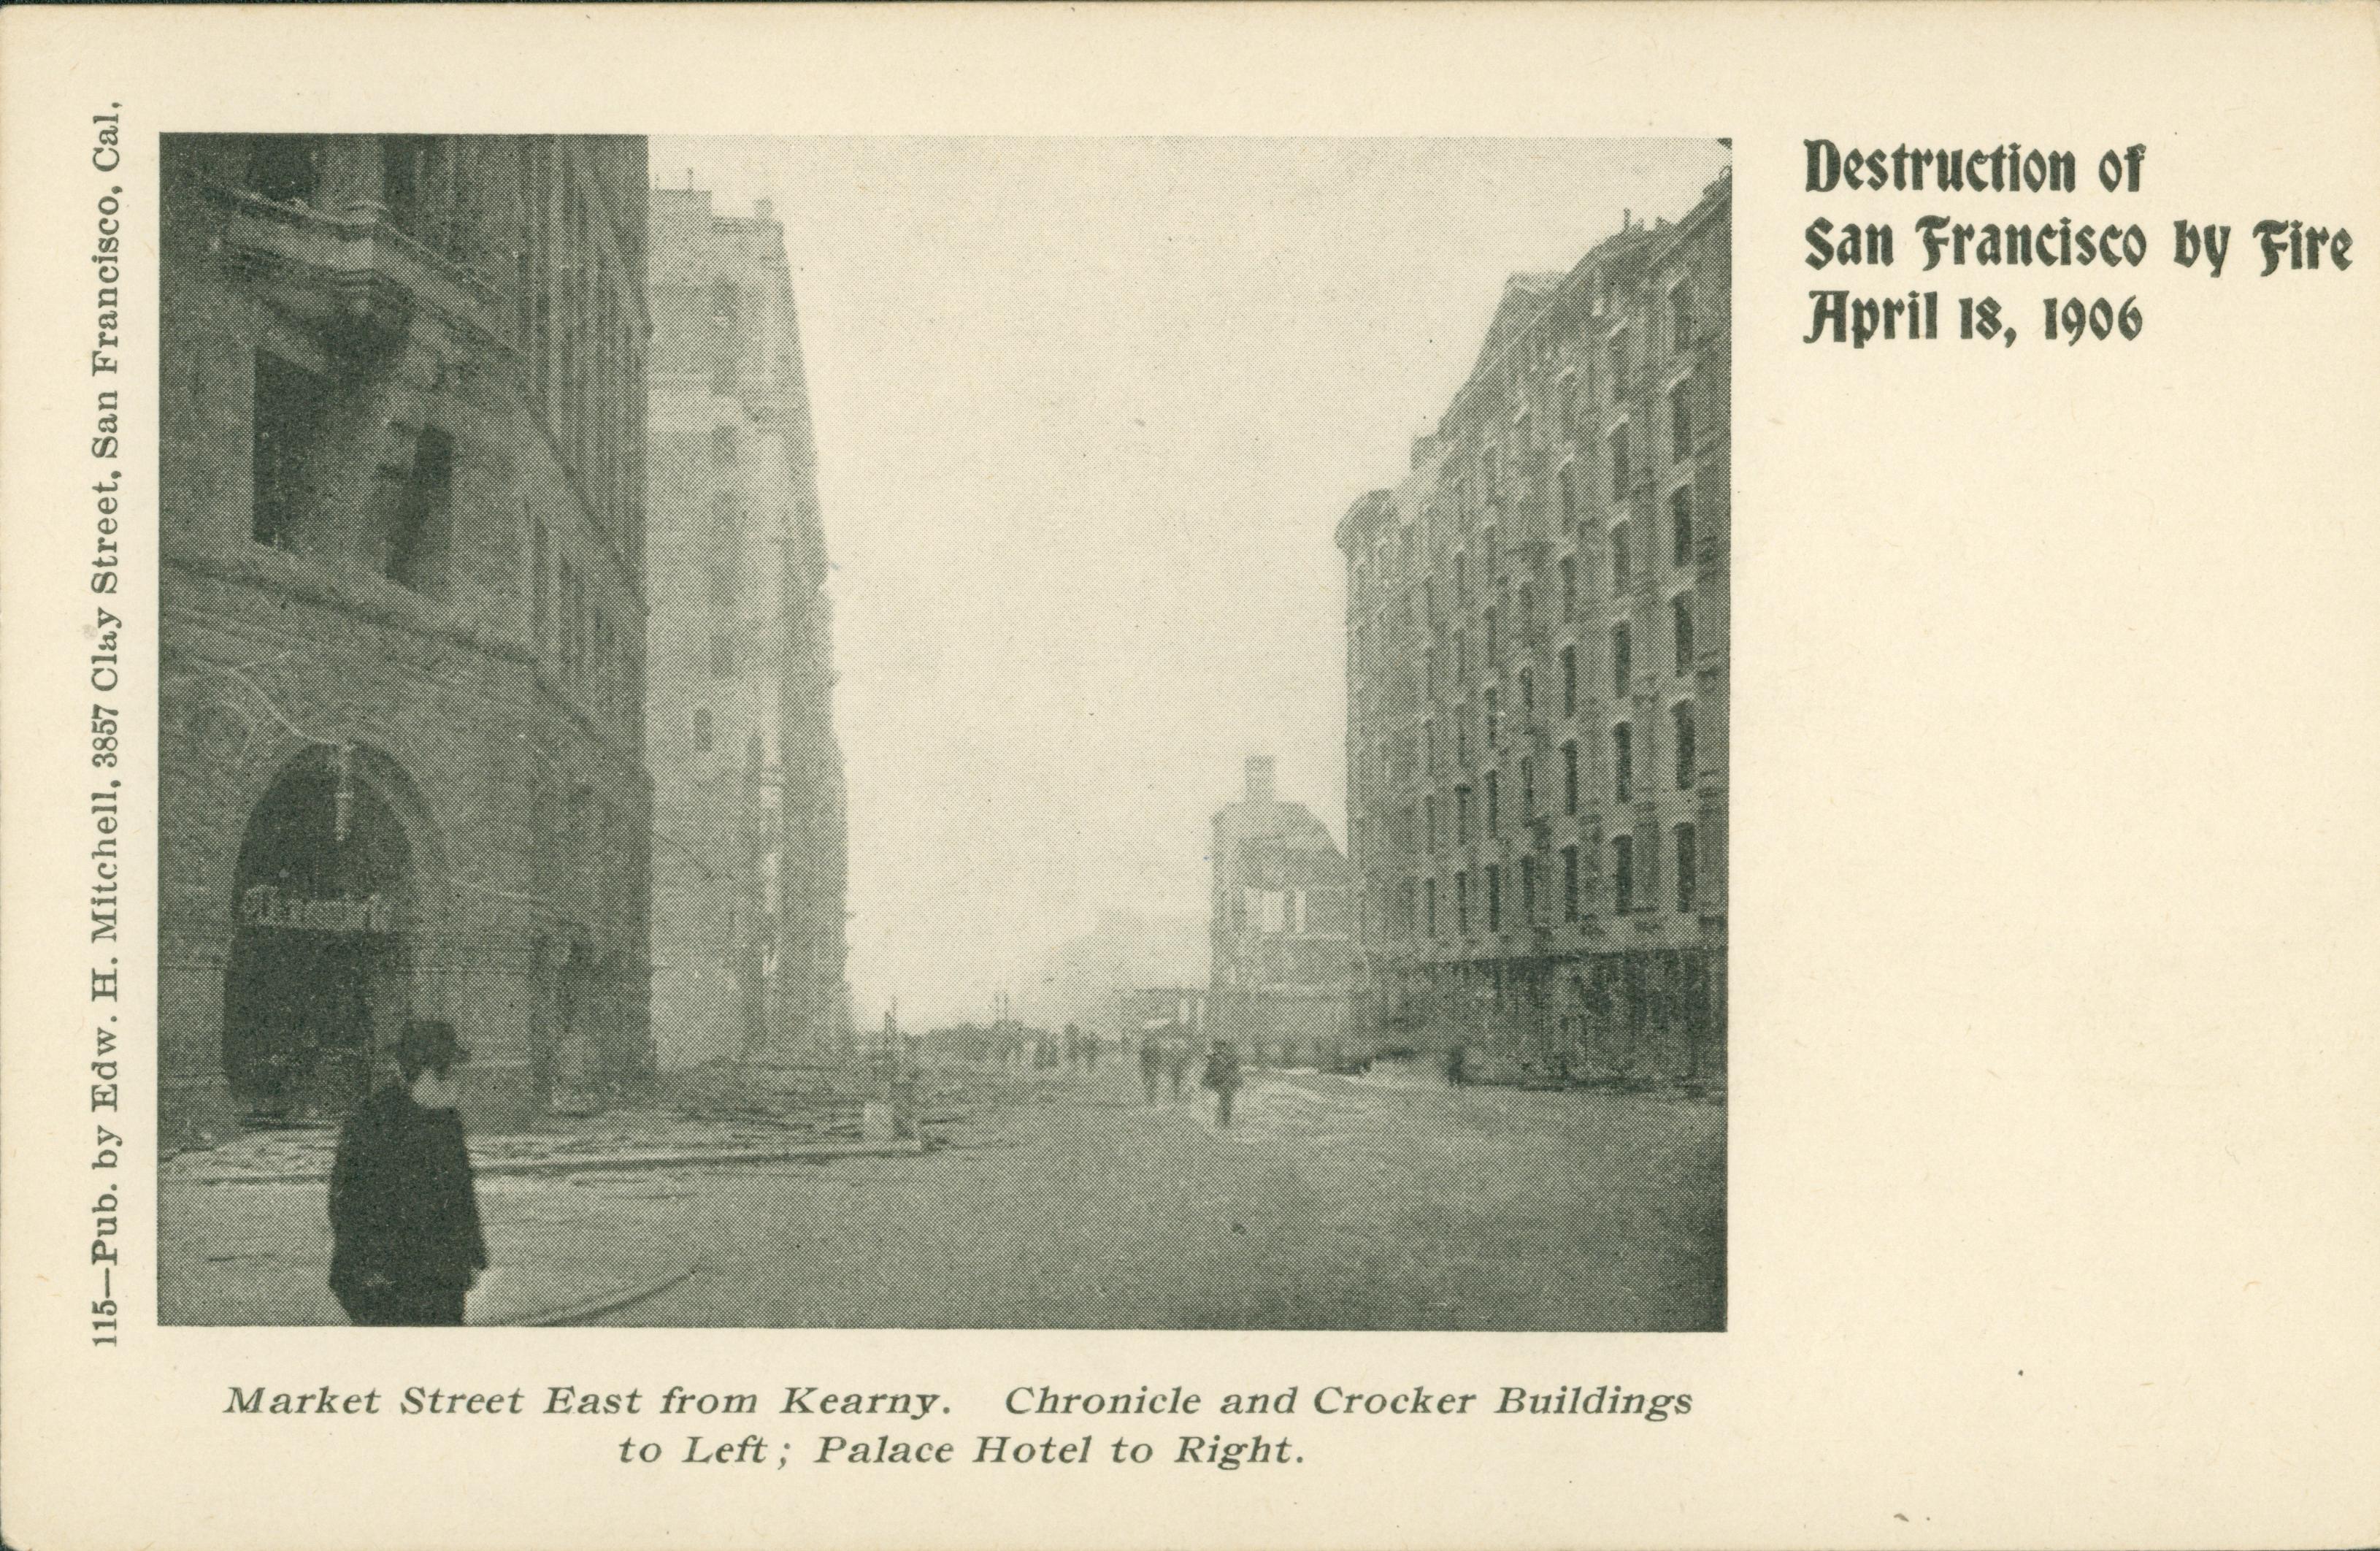 Shows the destruction of several prominent buildings on Market Street, San Francisco.